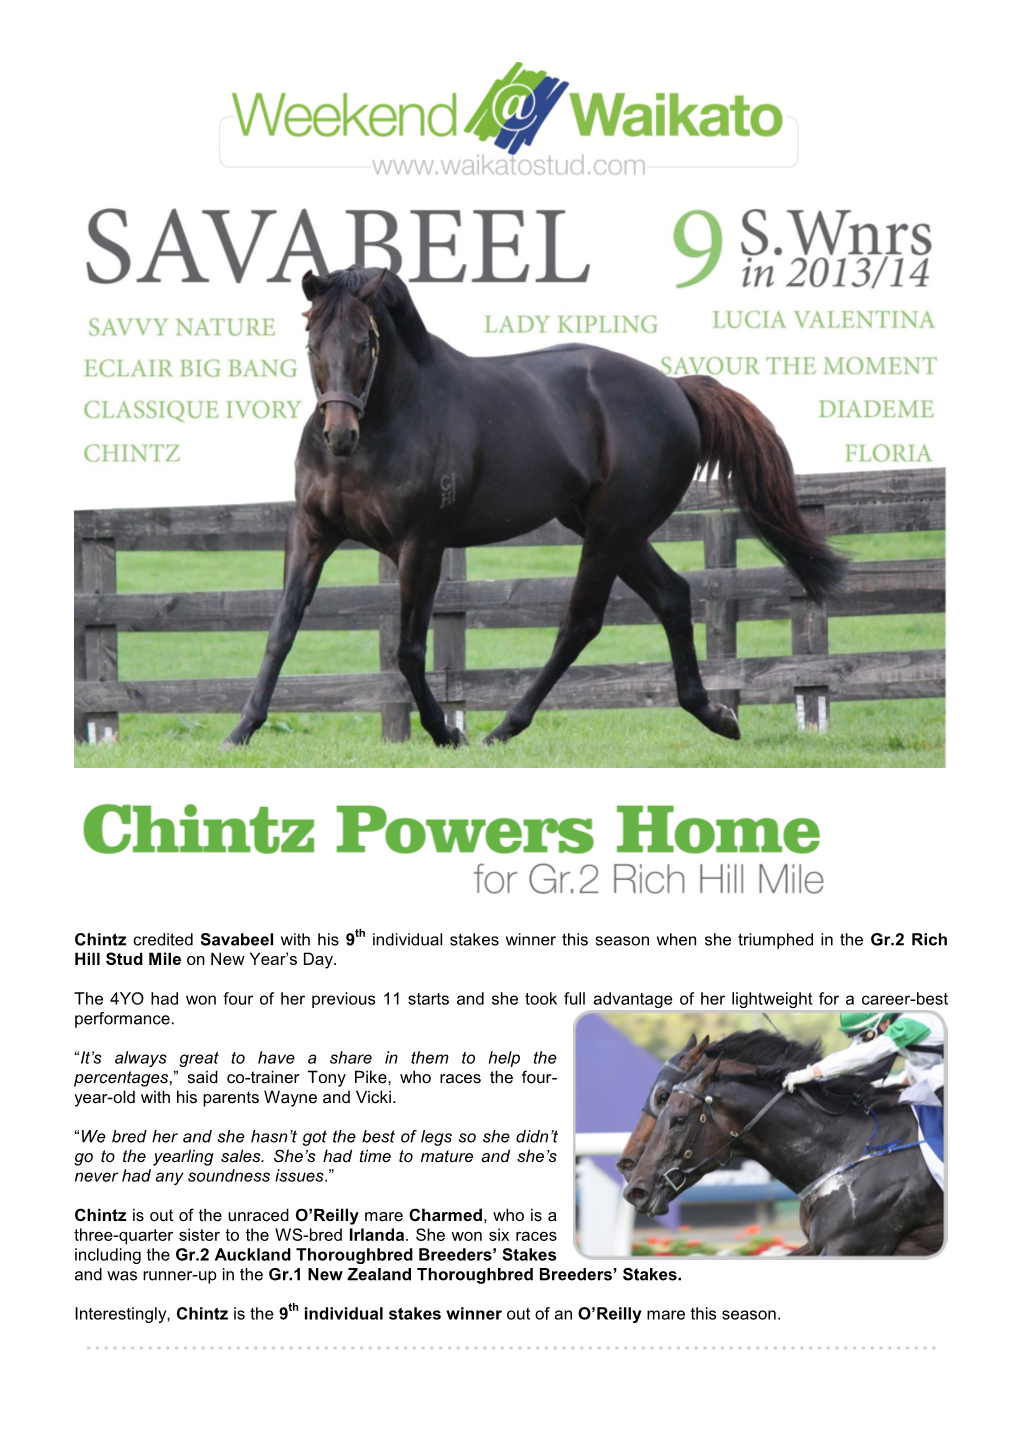 Chintz Credited Savabeel with His 9Th Individual Stakes Winner This Season When She Triumphed in the Gr.2 Rich Hill Stud Mile on New Year’S Day